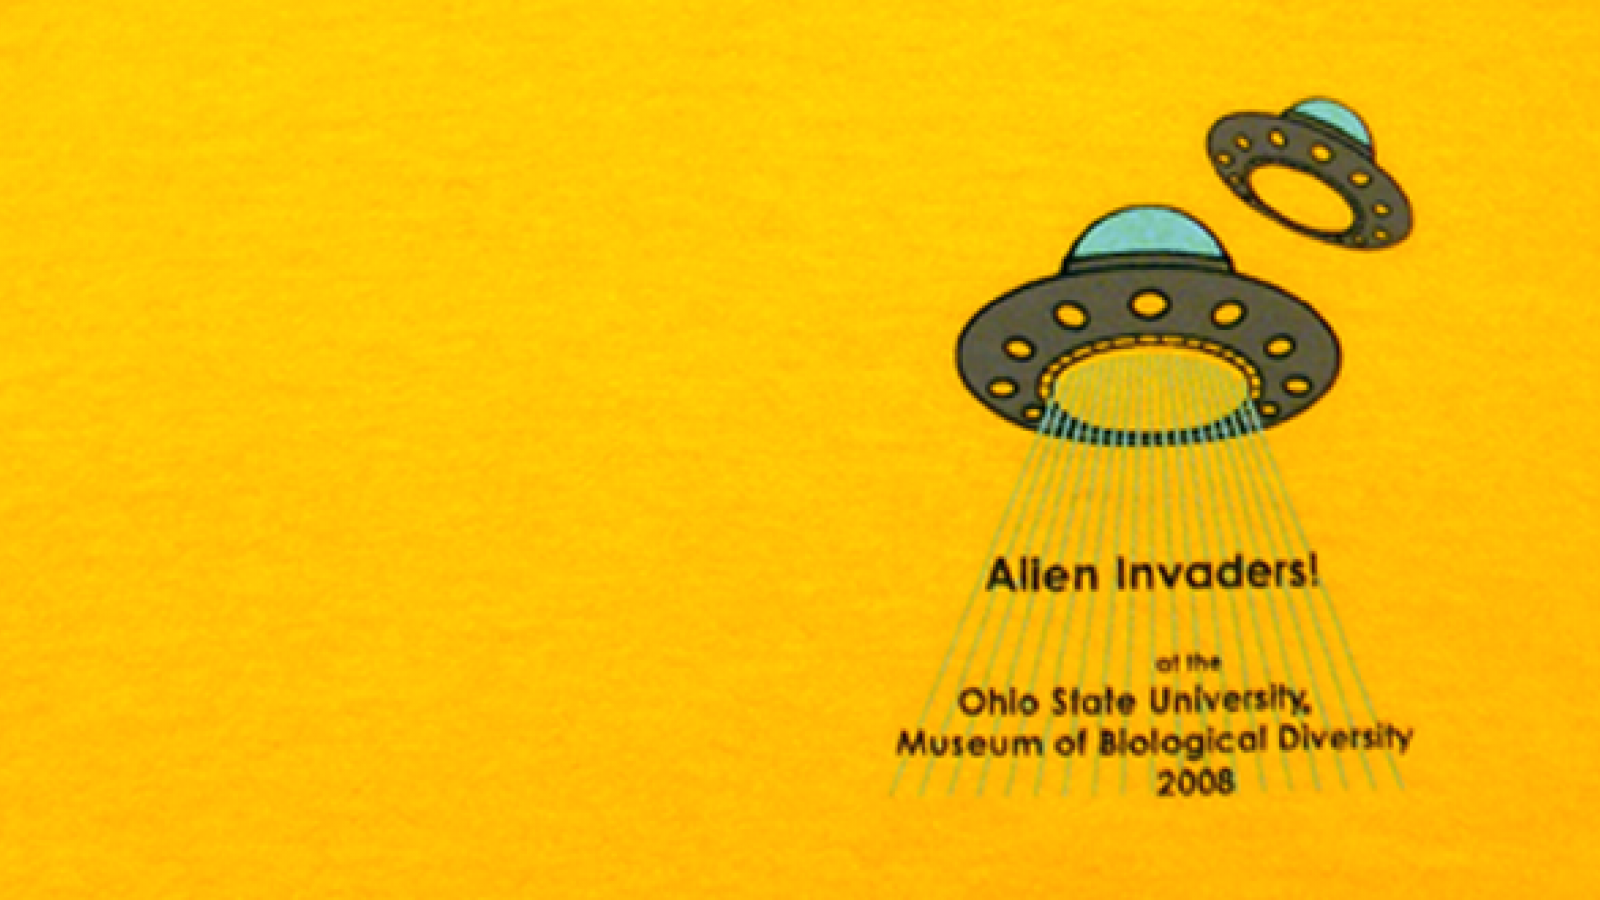 T-shirt design for the 2008 Open House